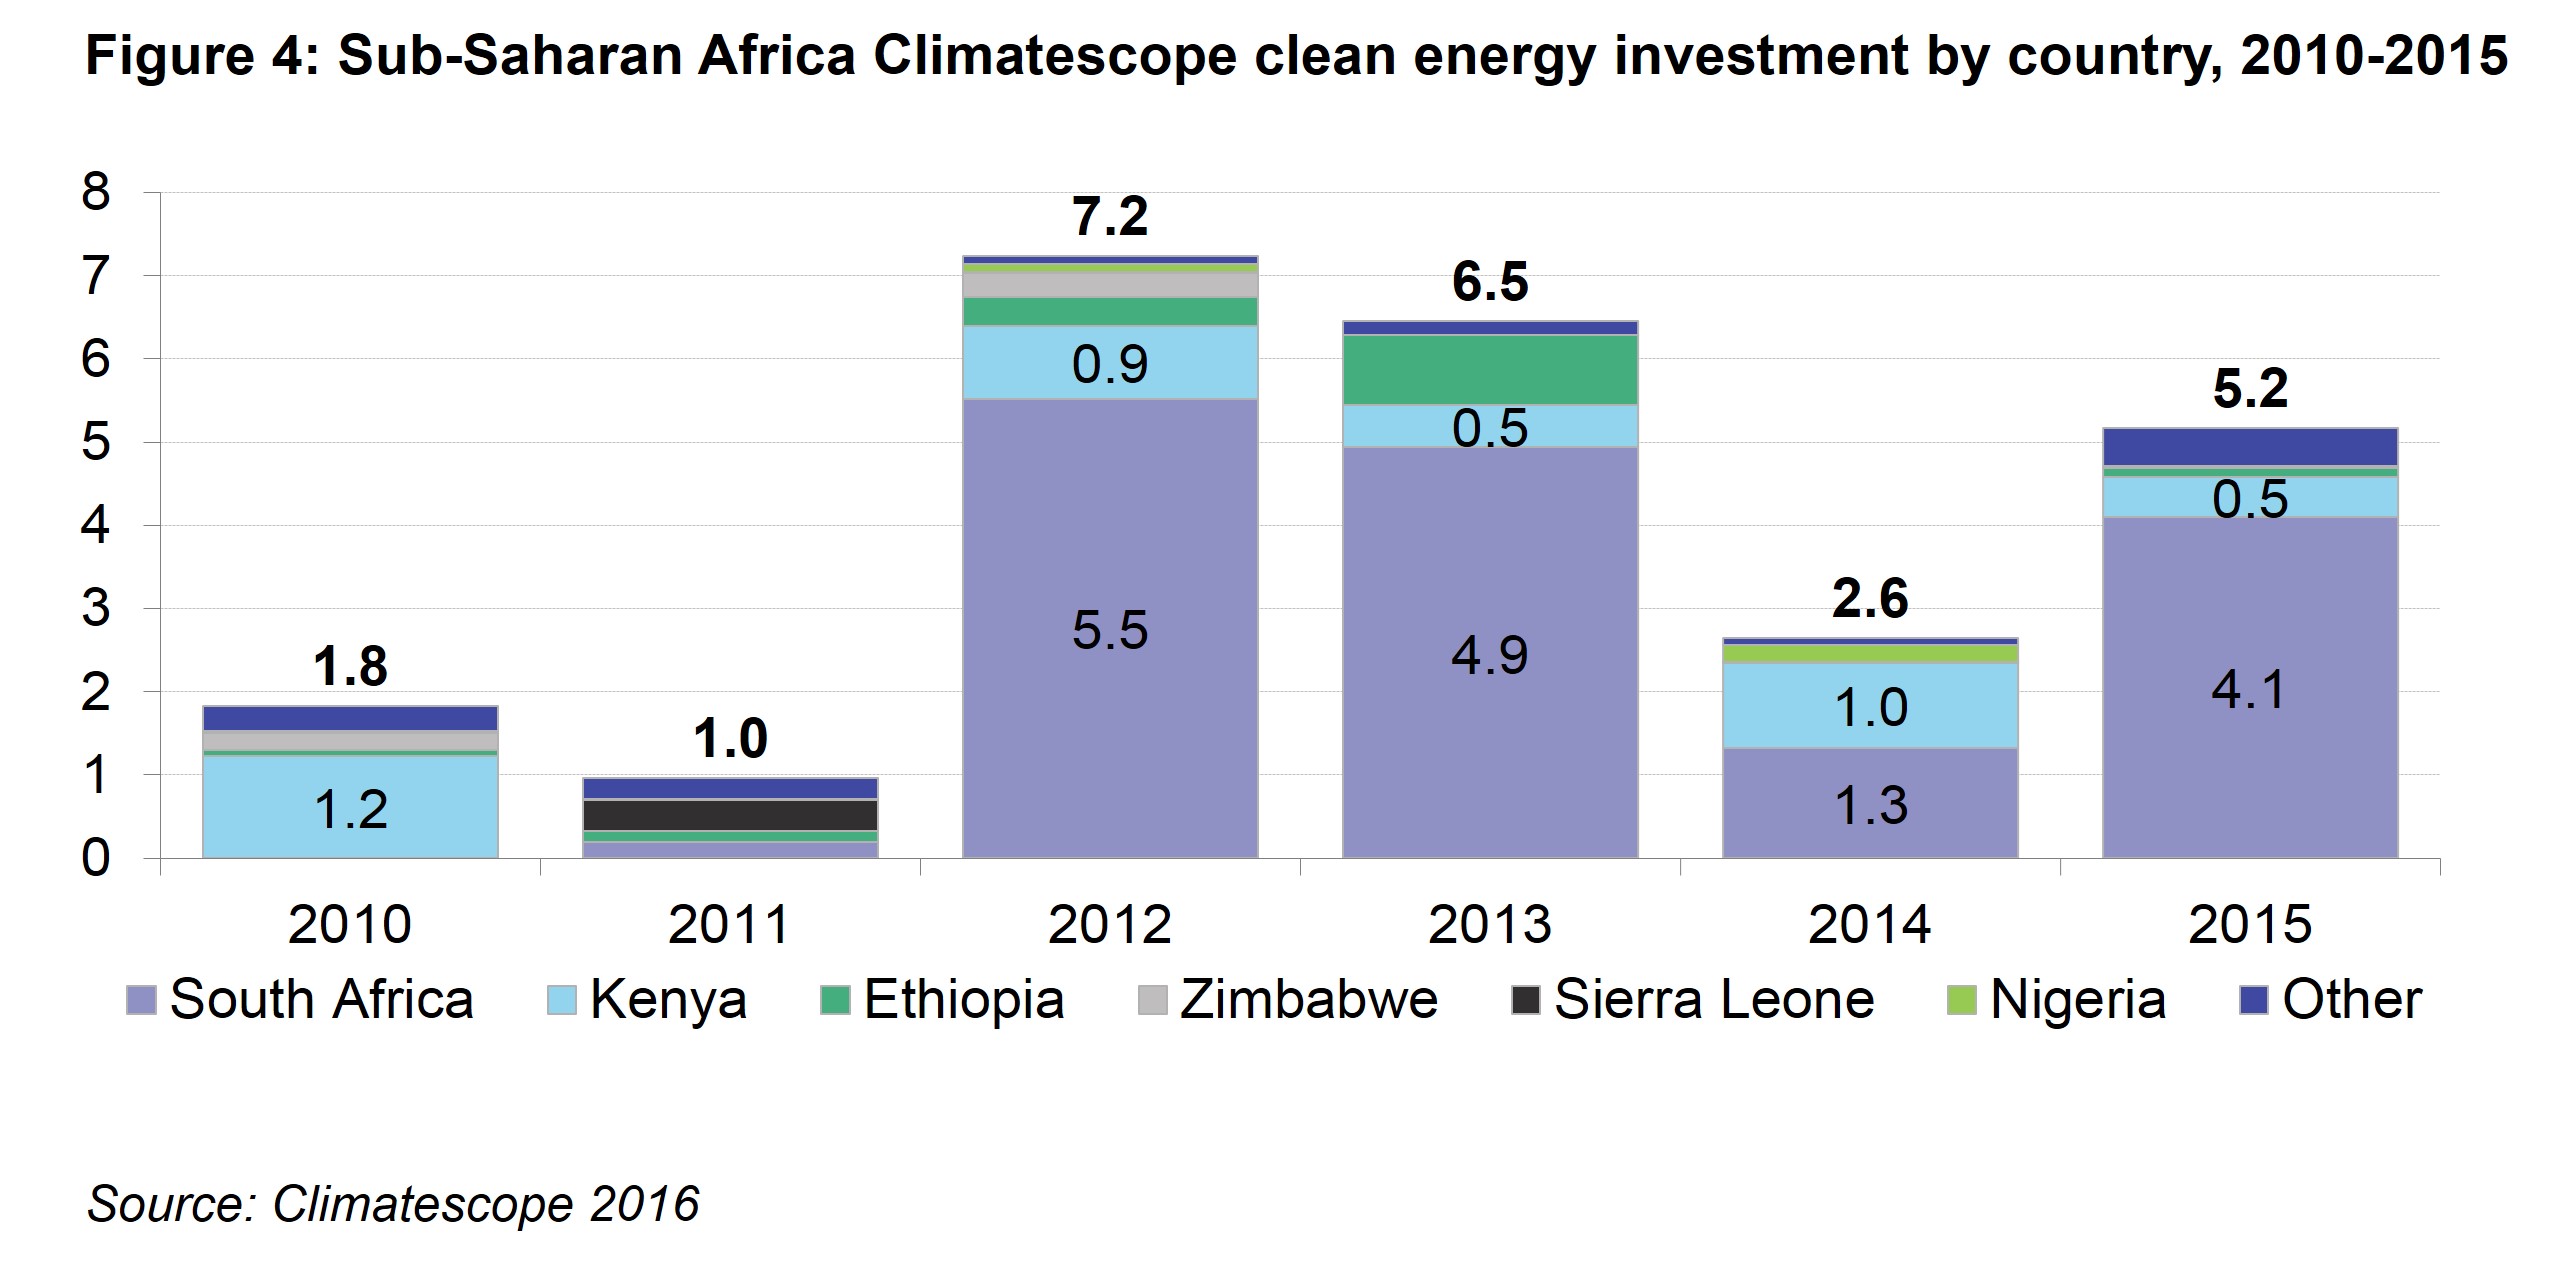 AM Fig 4 - Sub-Saharan Africa Climatescope clean energy investment by country, 2010 - 2015  